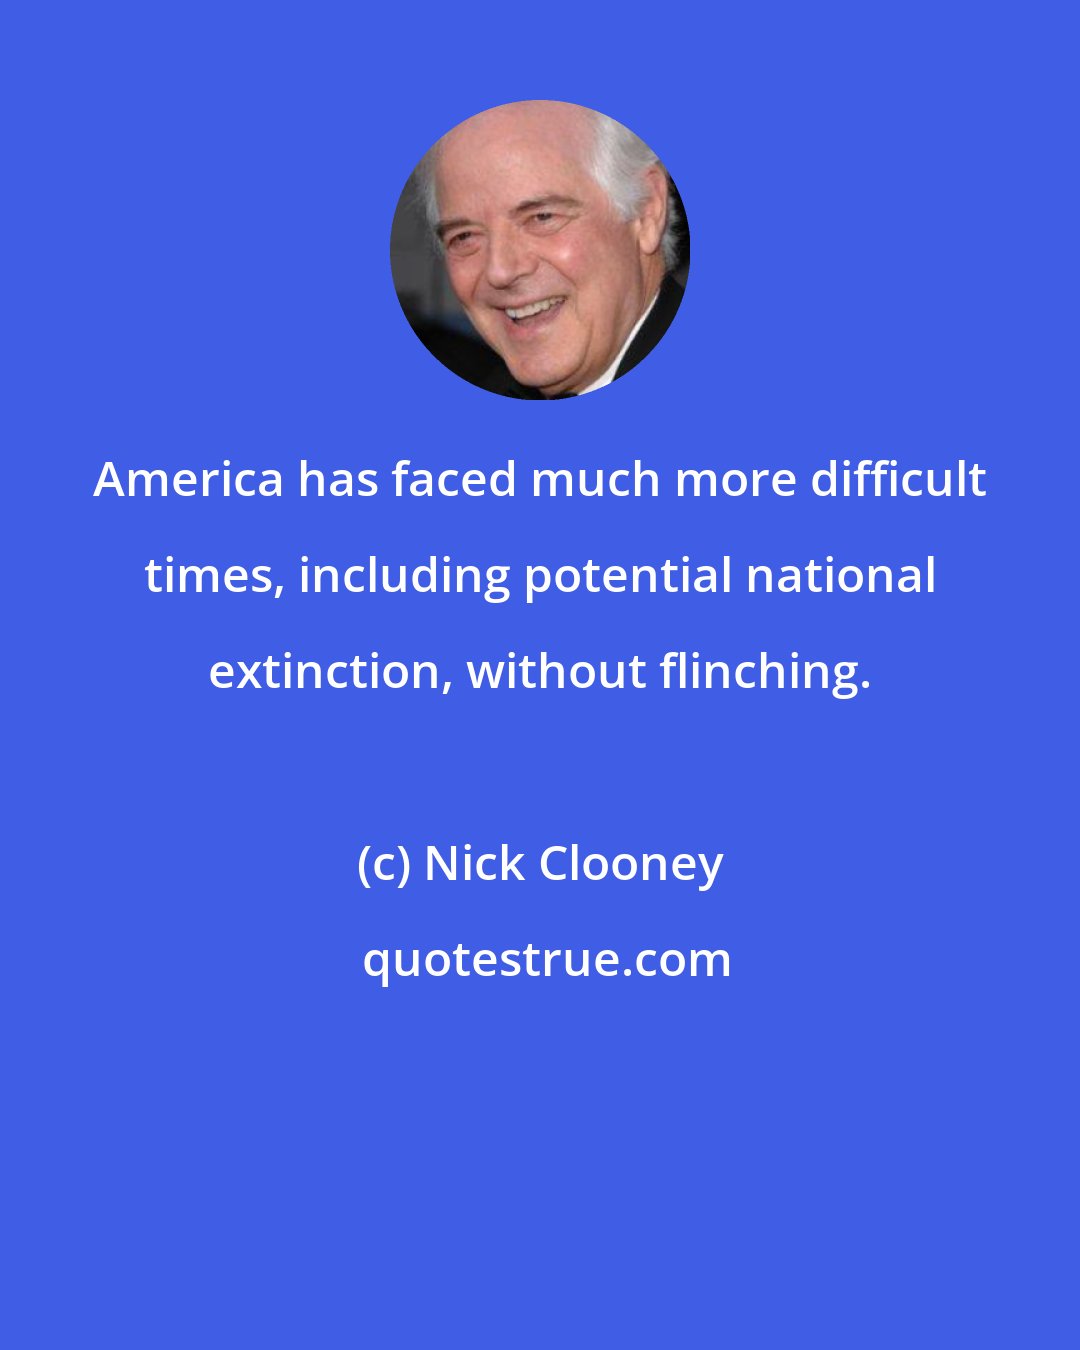 Nick Clooney: America has faced much more difficult times, including potential national extinction, without flinching.